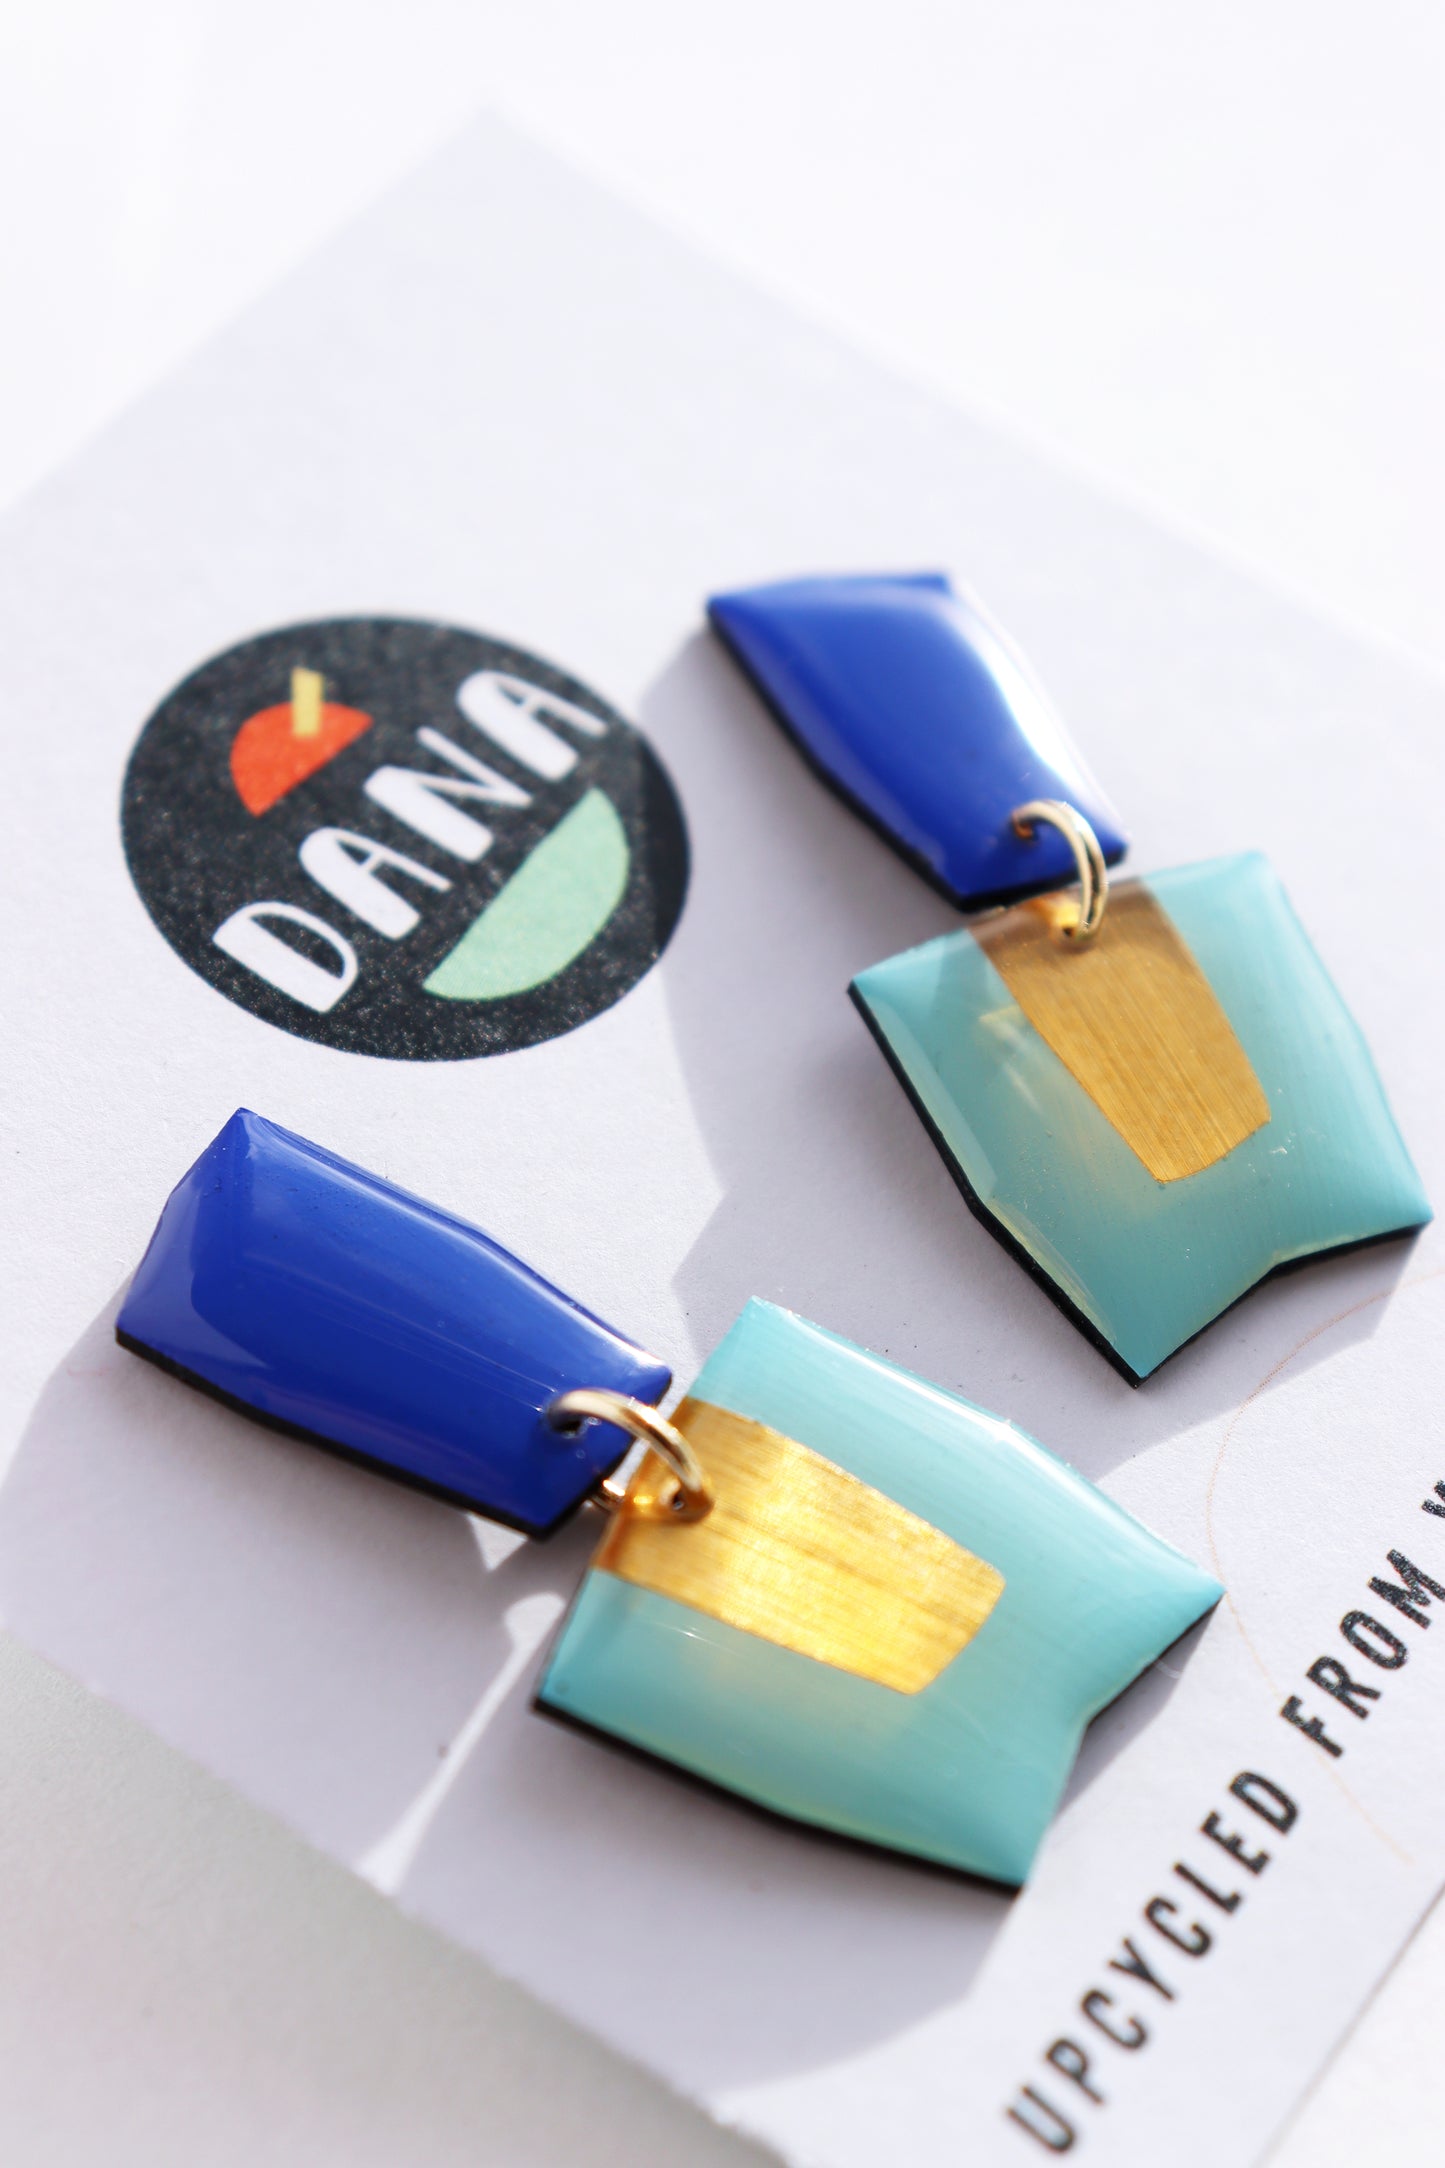 Connie no.2 / Festive contemporary earrings in blue with lush pops of gold